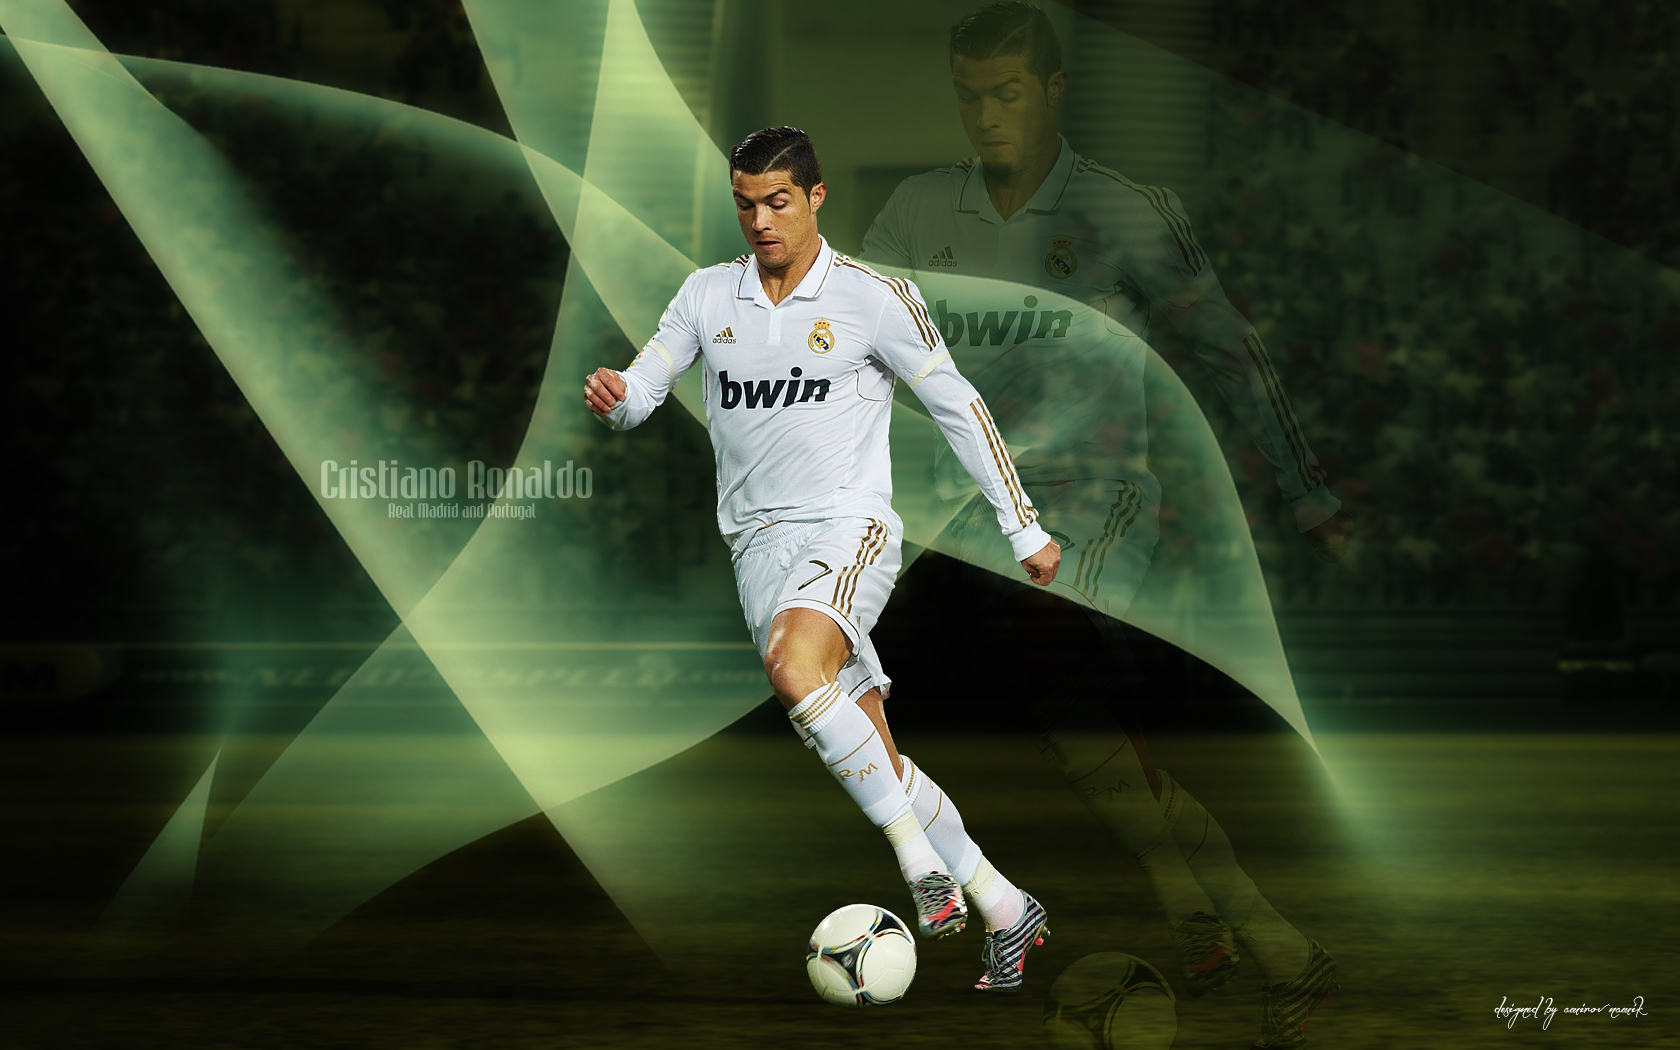 Cristiano Ronaldo Picture by Namik Amirov - Image Abyss